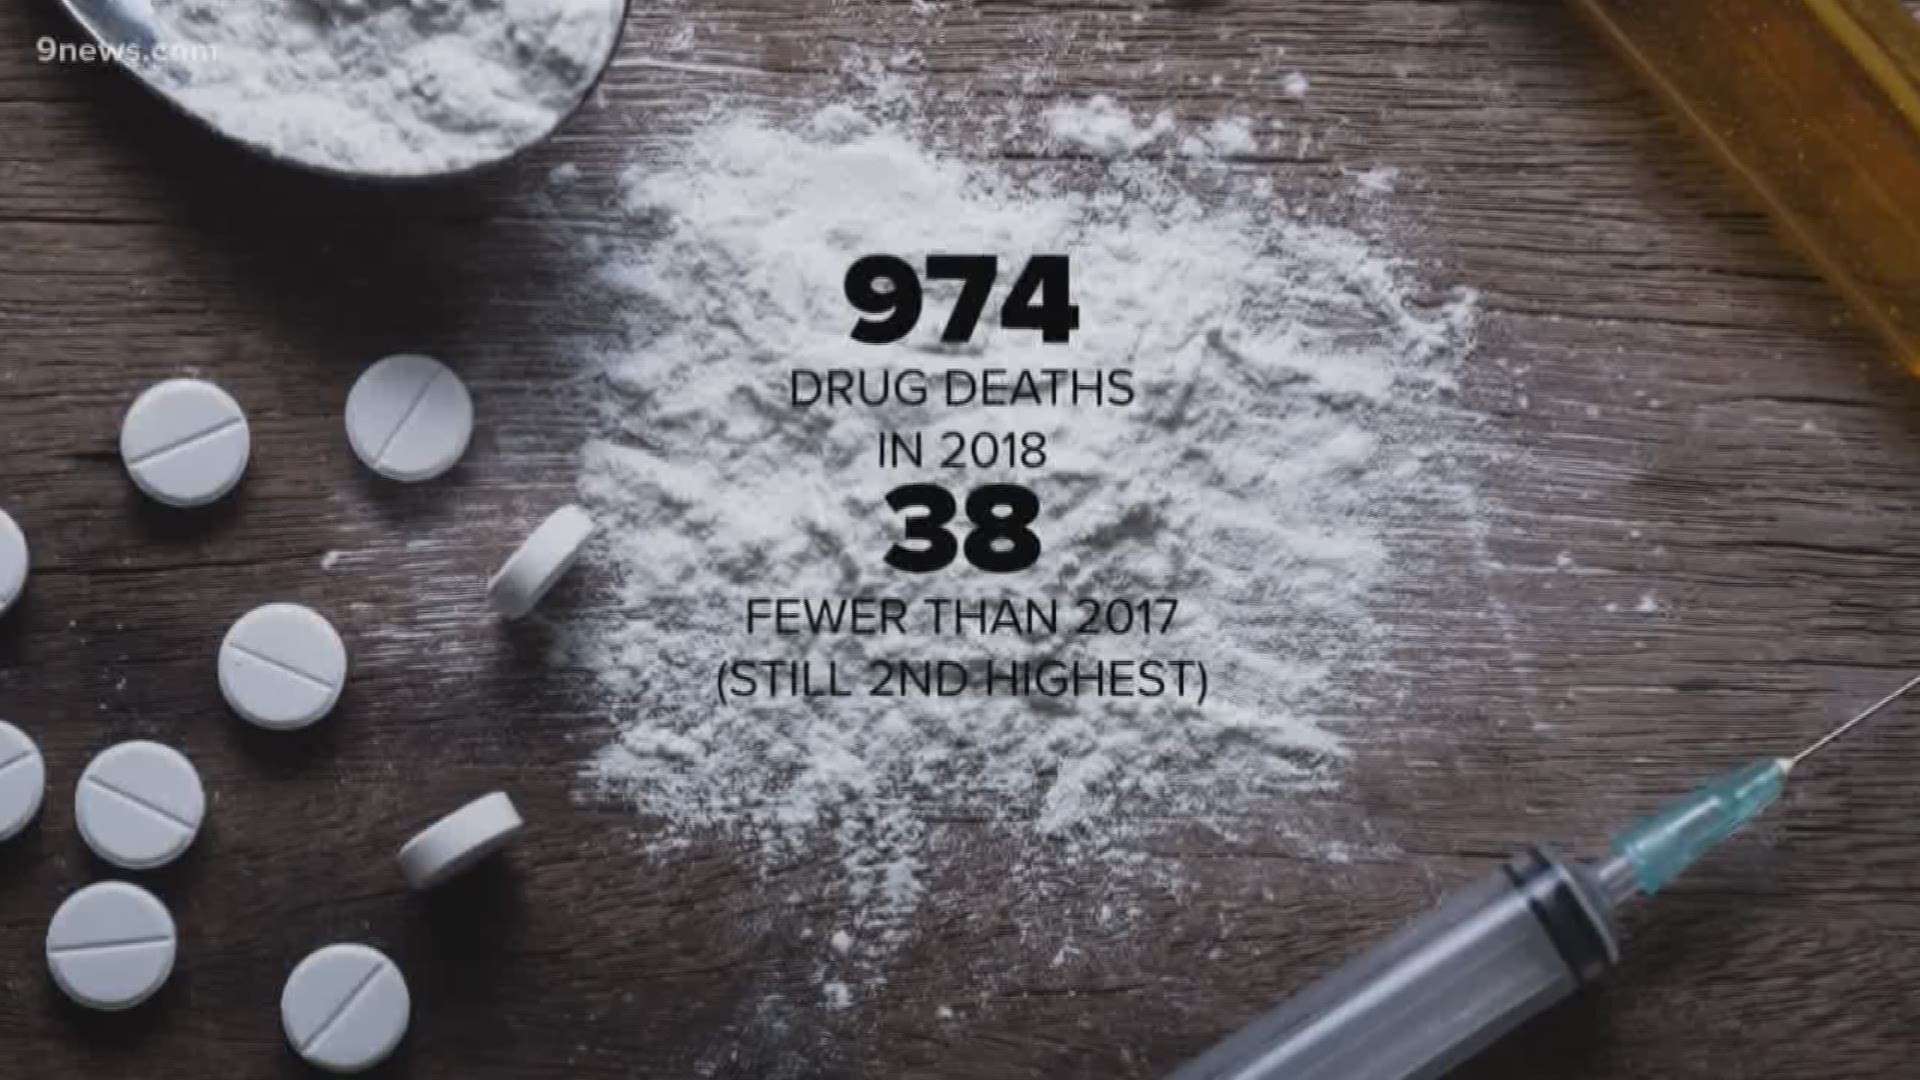 Drug overdoses killed nearly 1,000 people in Colorado last year. The number is high, but it's actually the first drop Colorado has seen in years. That's due in part because of fewer deaths from prescription painkillers.